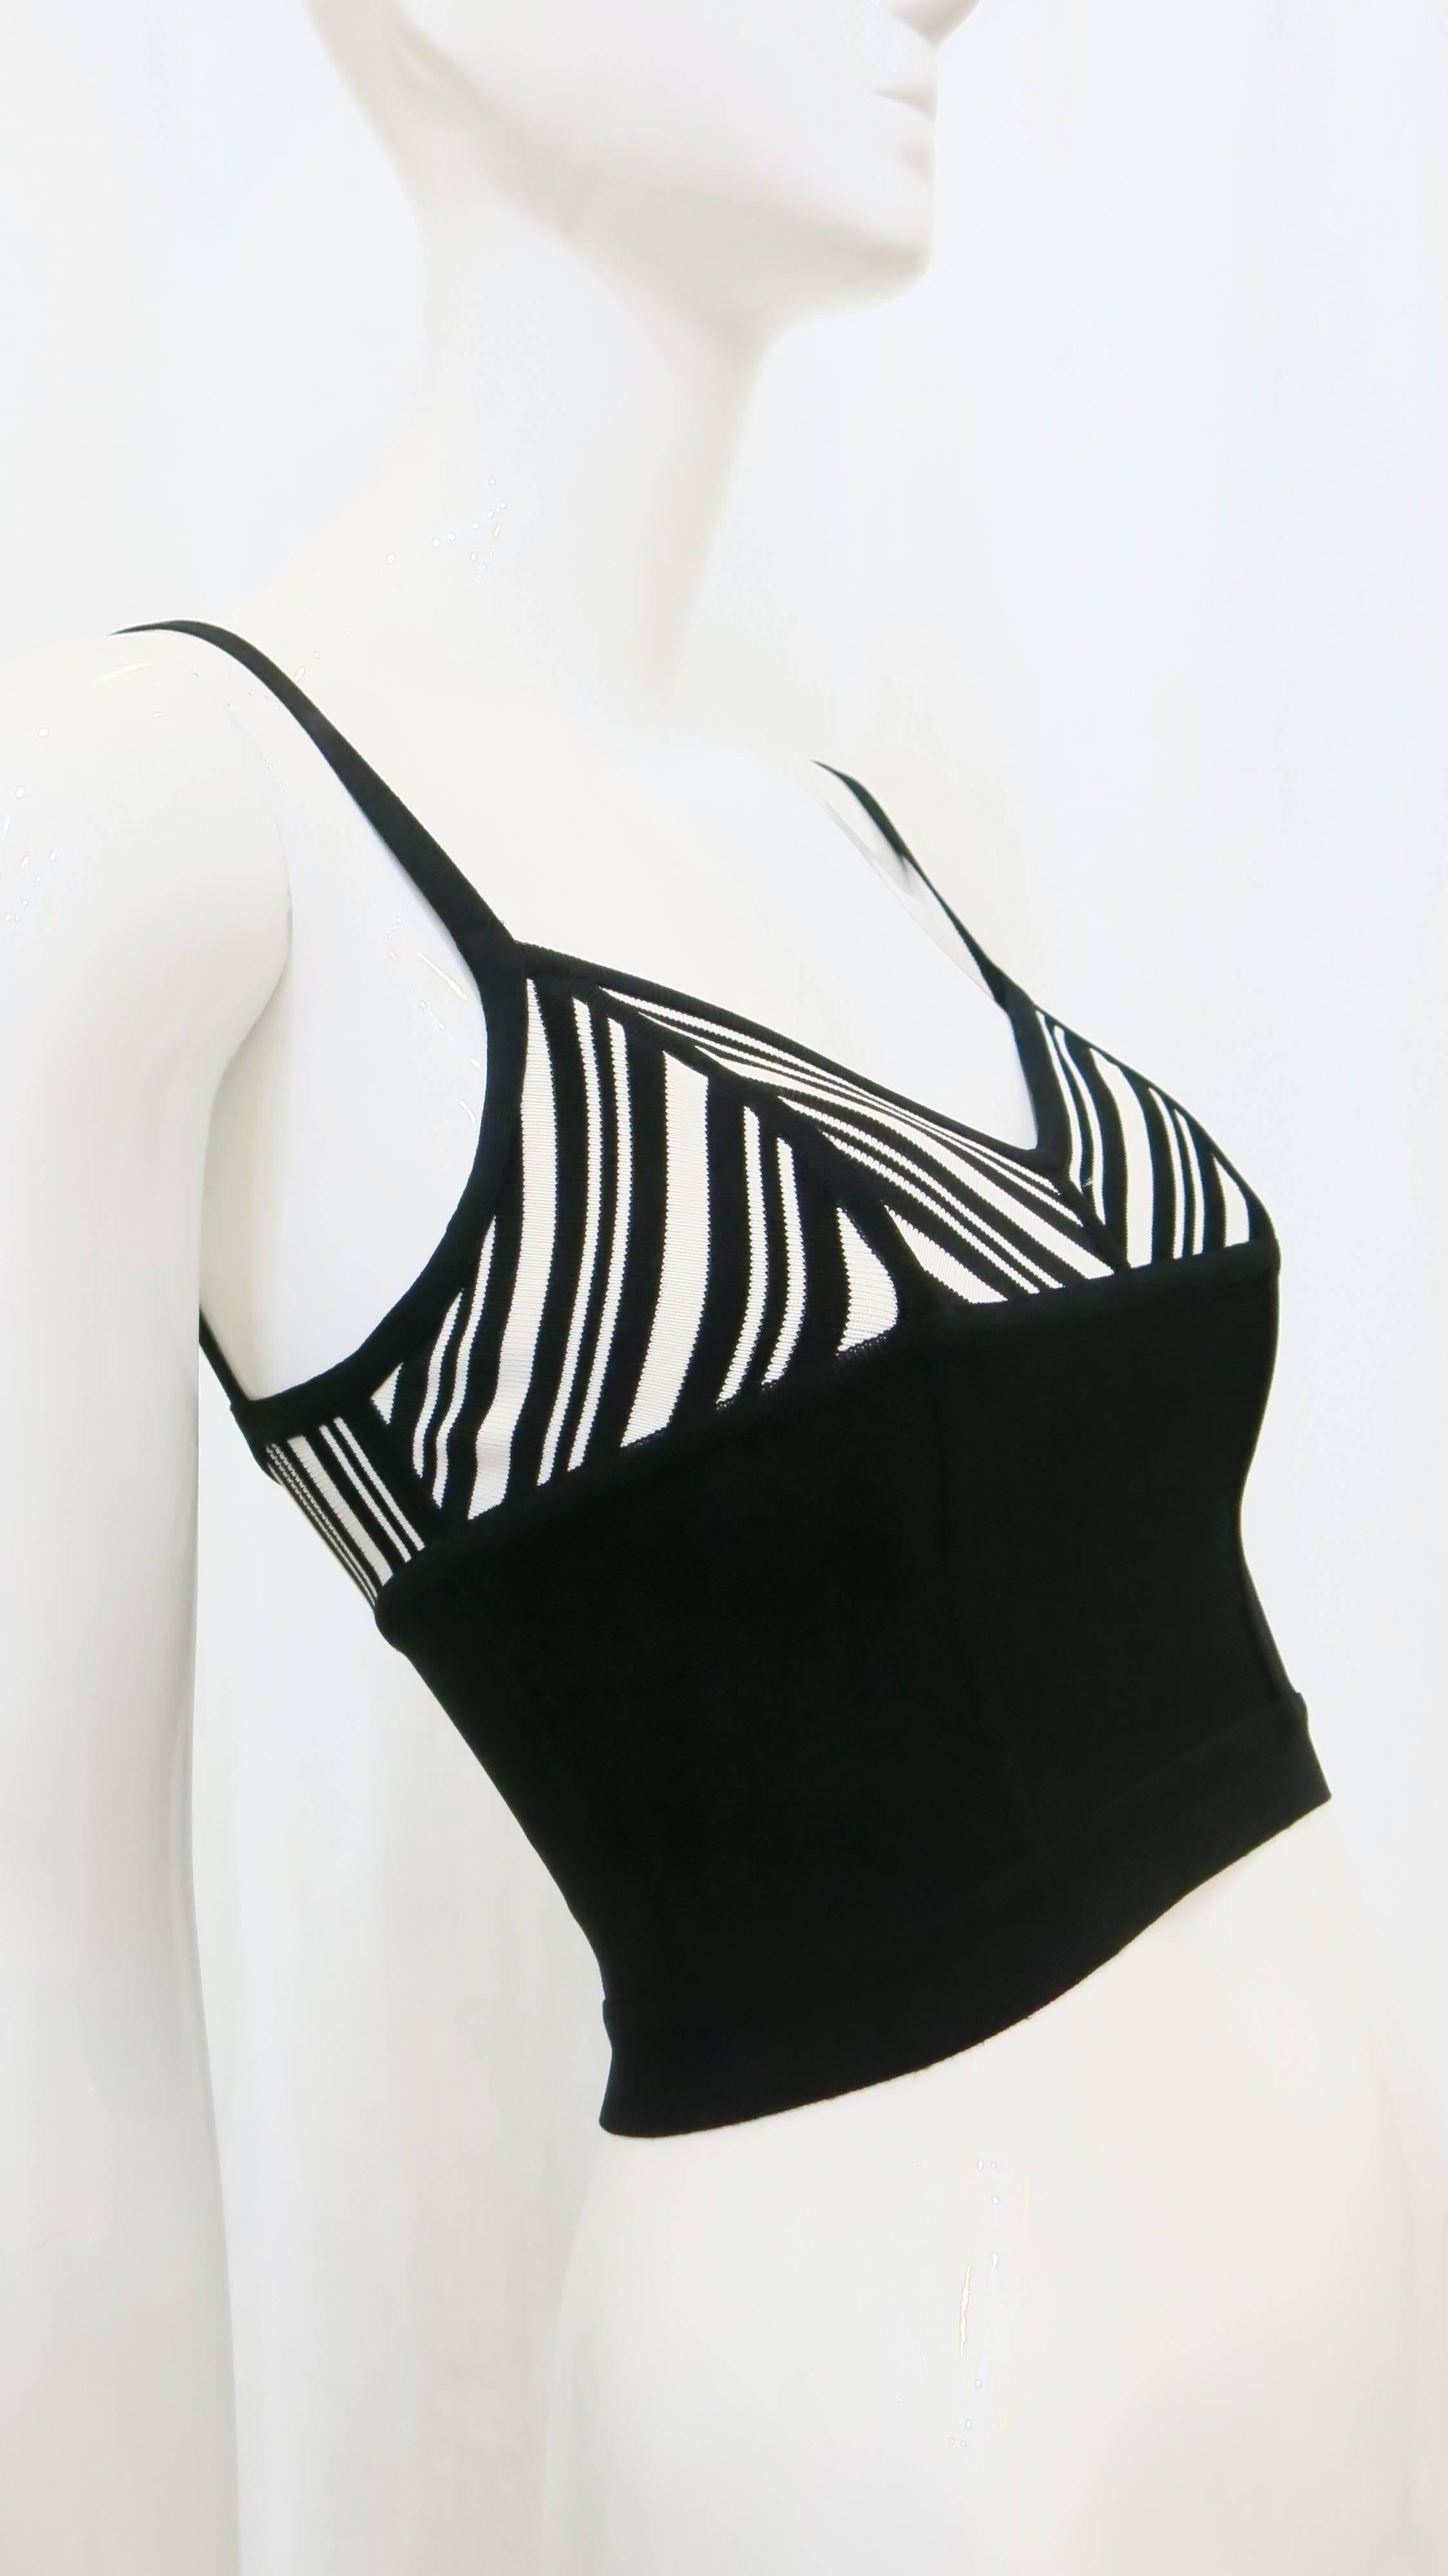 Women's 1980s Herve Leger Black and White Crop Top